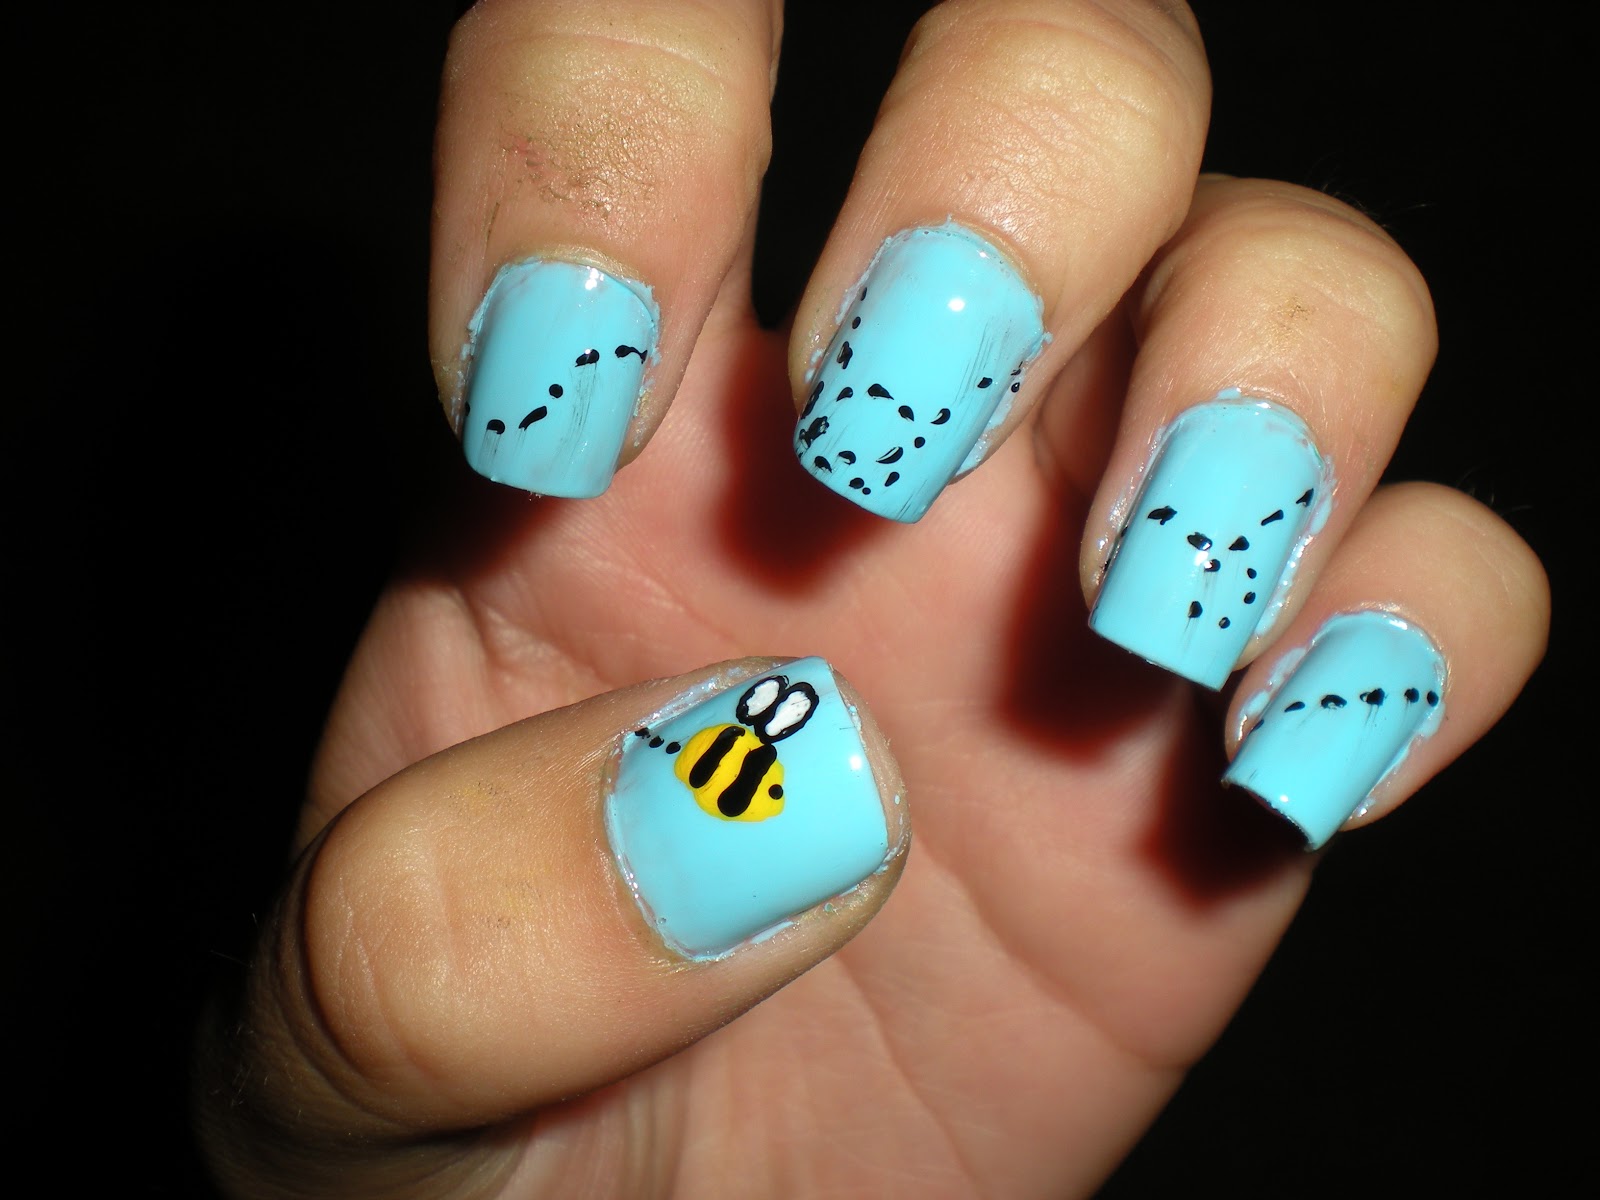 8. Bumble Bee French Tip Nails - wide 1